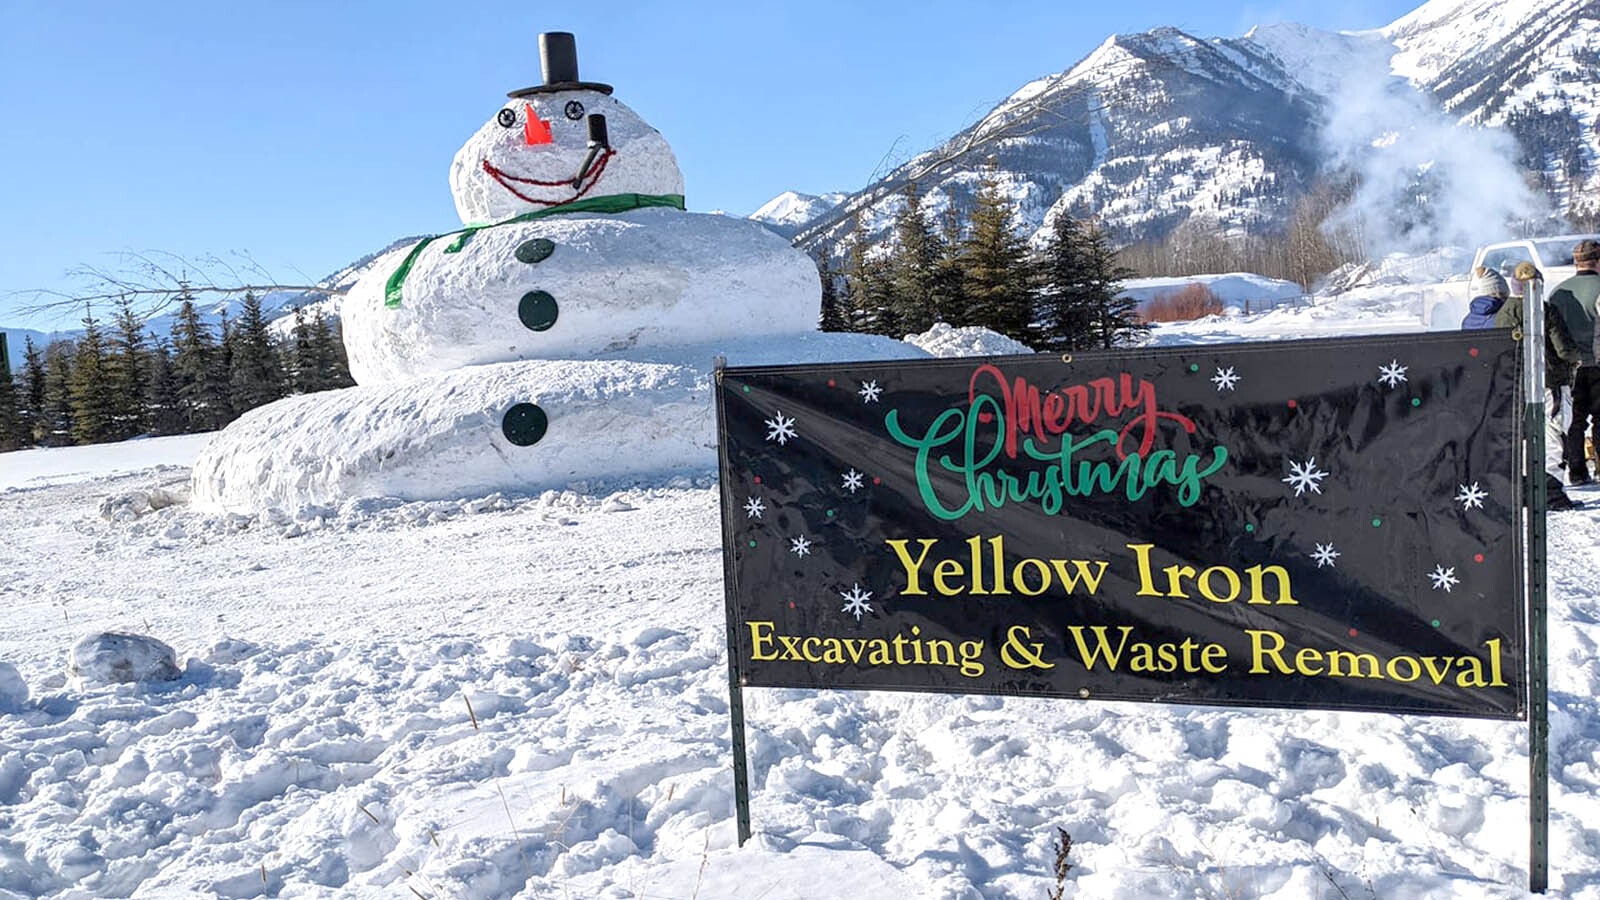 Since 2012, the Garvin family and Yellow Iron Excavating and Waste Removal in Jackson has built this humongous snowman near Teton Village. To put the size of it in perspective, the top hat is a 55-gallon drum.